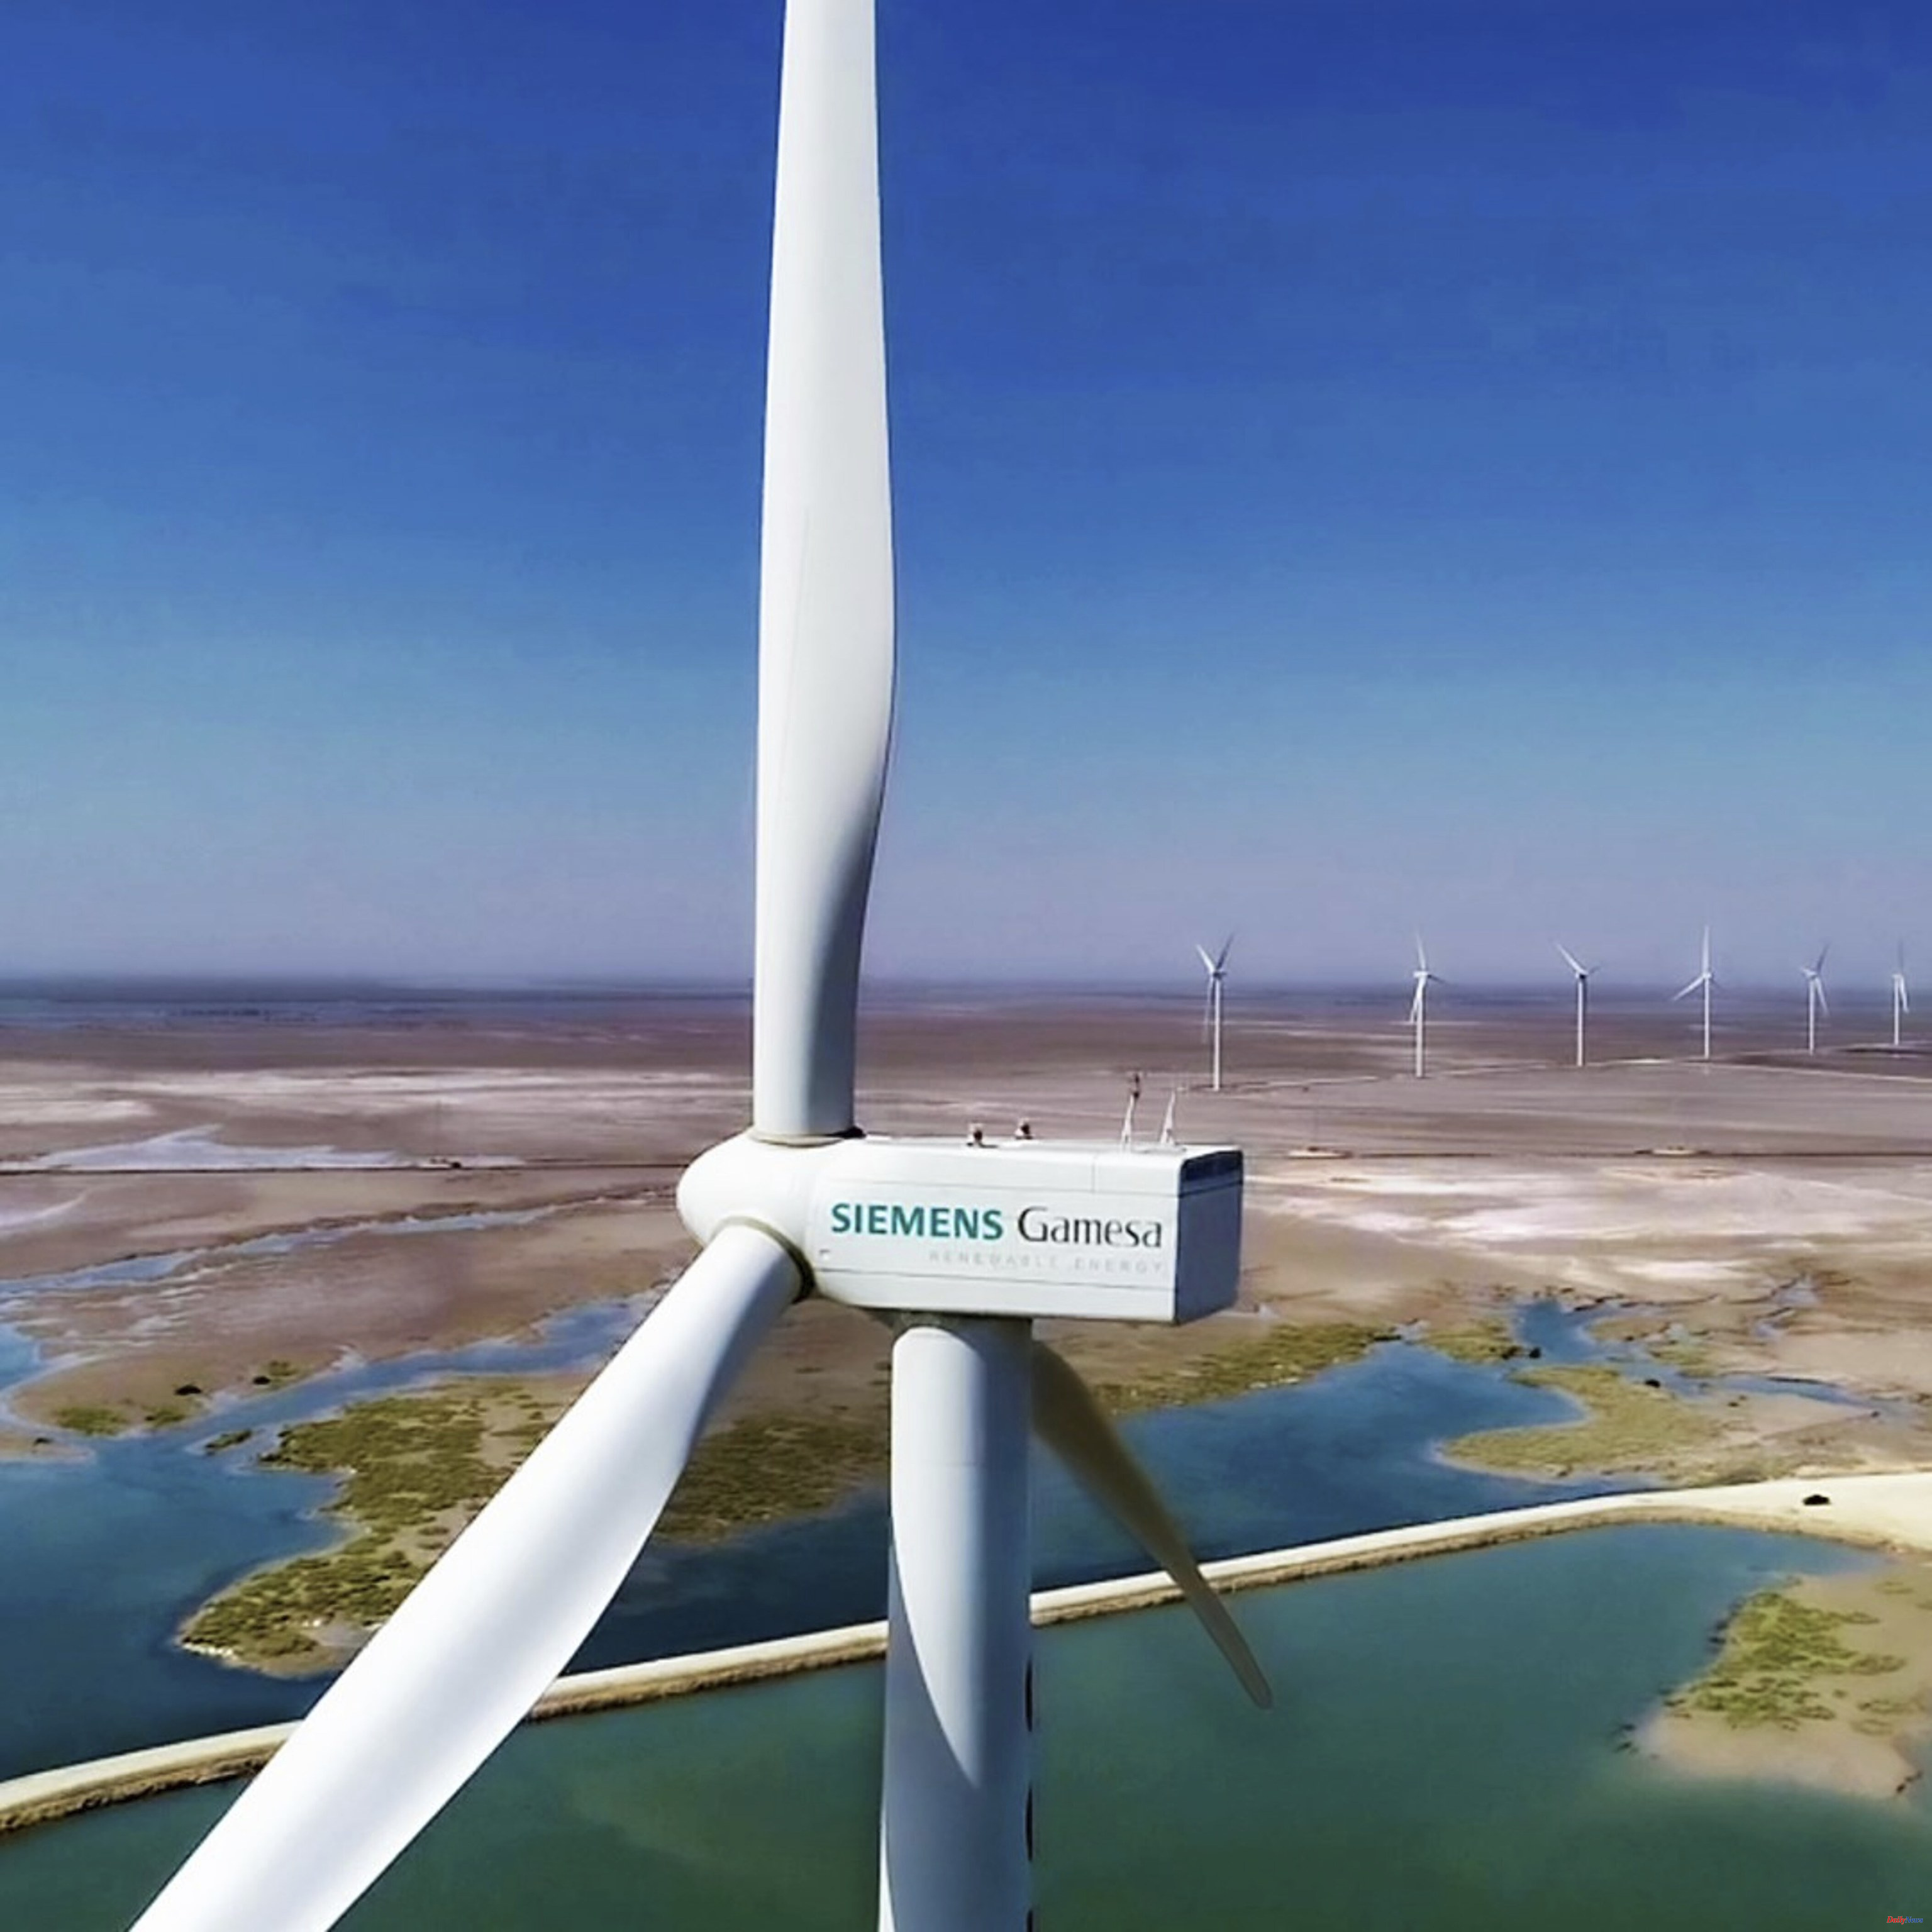 Renewables Siemens announces cuts of 400 million euros in Gamesa but does not specify the impact in Spain